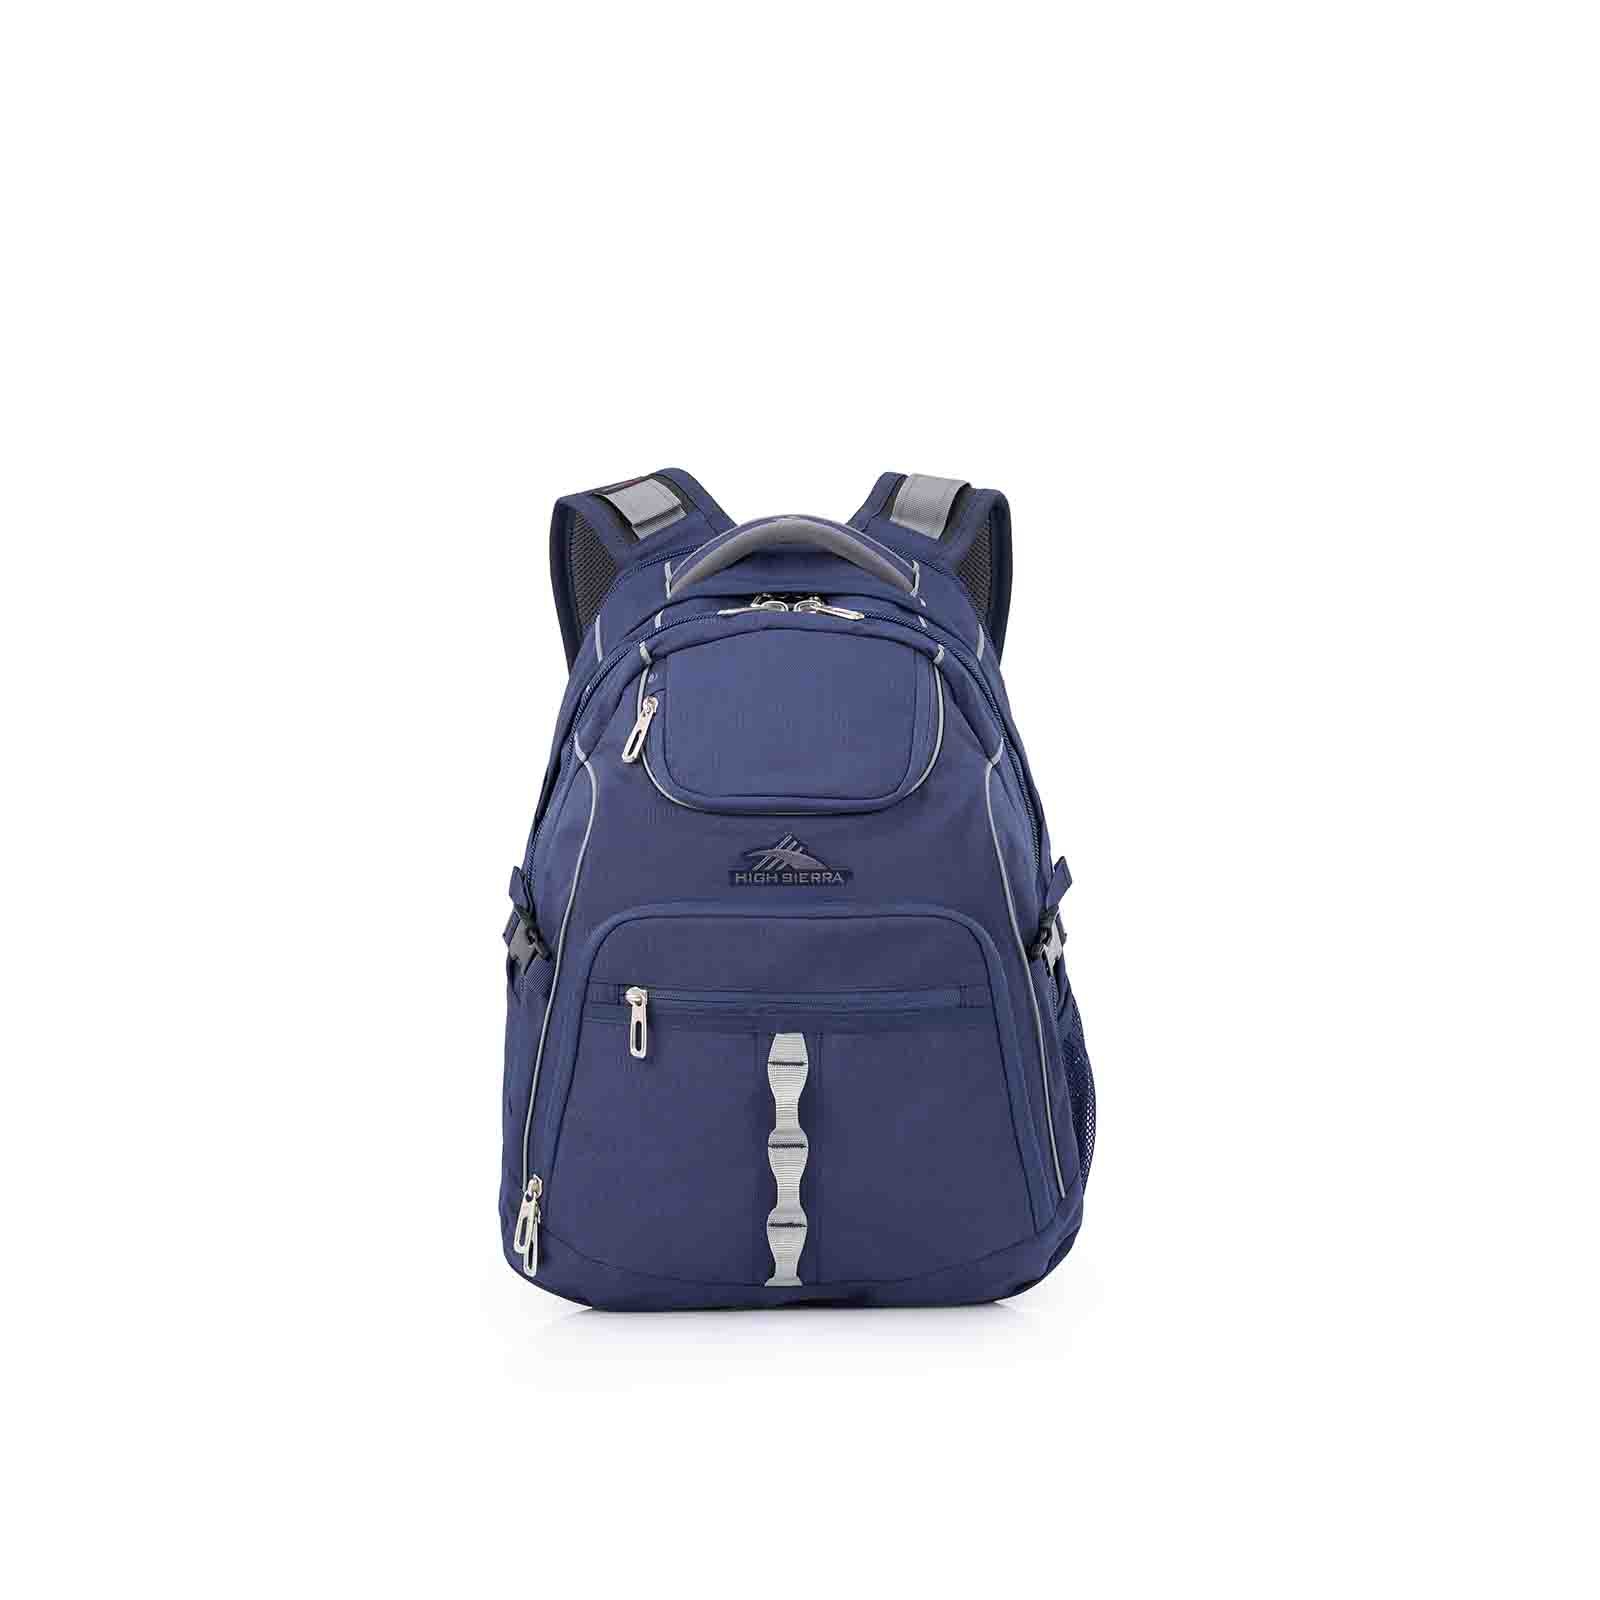 High-Sierra-Access-3-Eco-16-Inch-Laptop-Backpack-Marine-Blue-Front